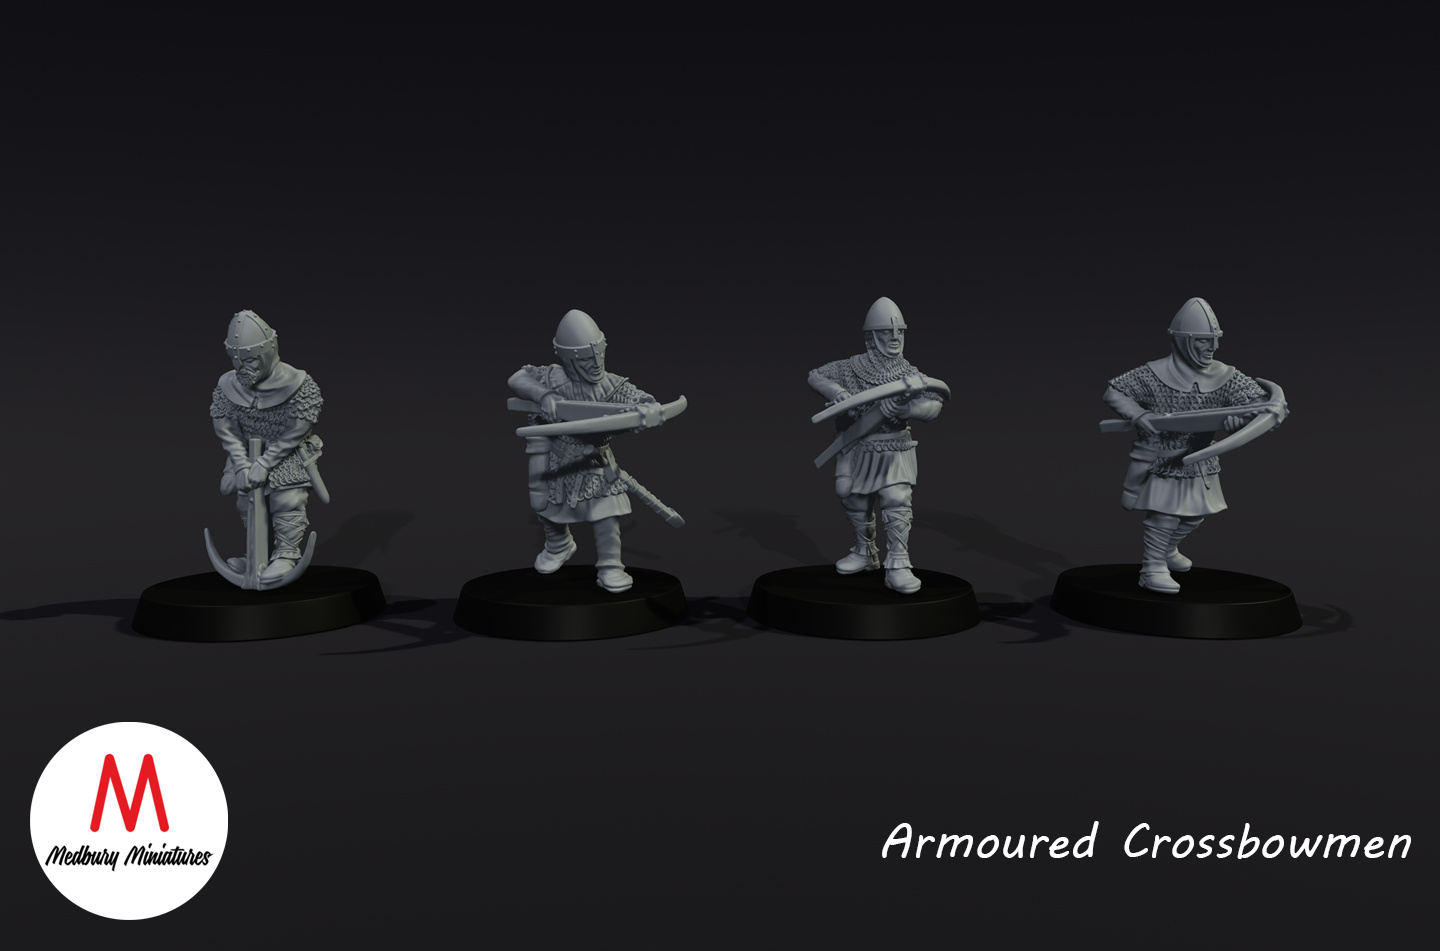 Norman Armored Crossbows